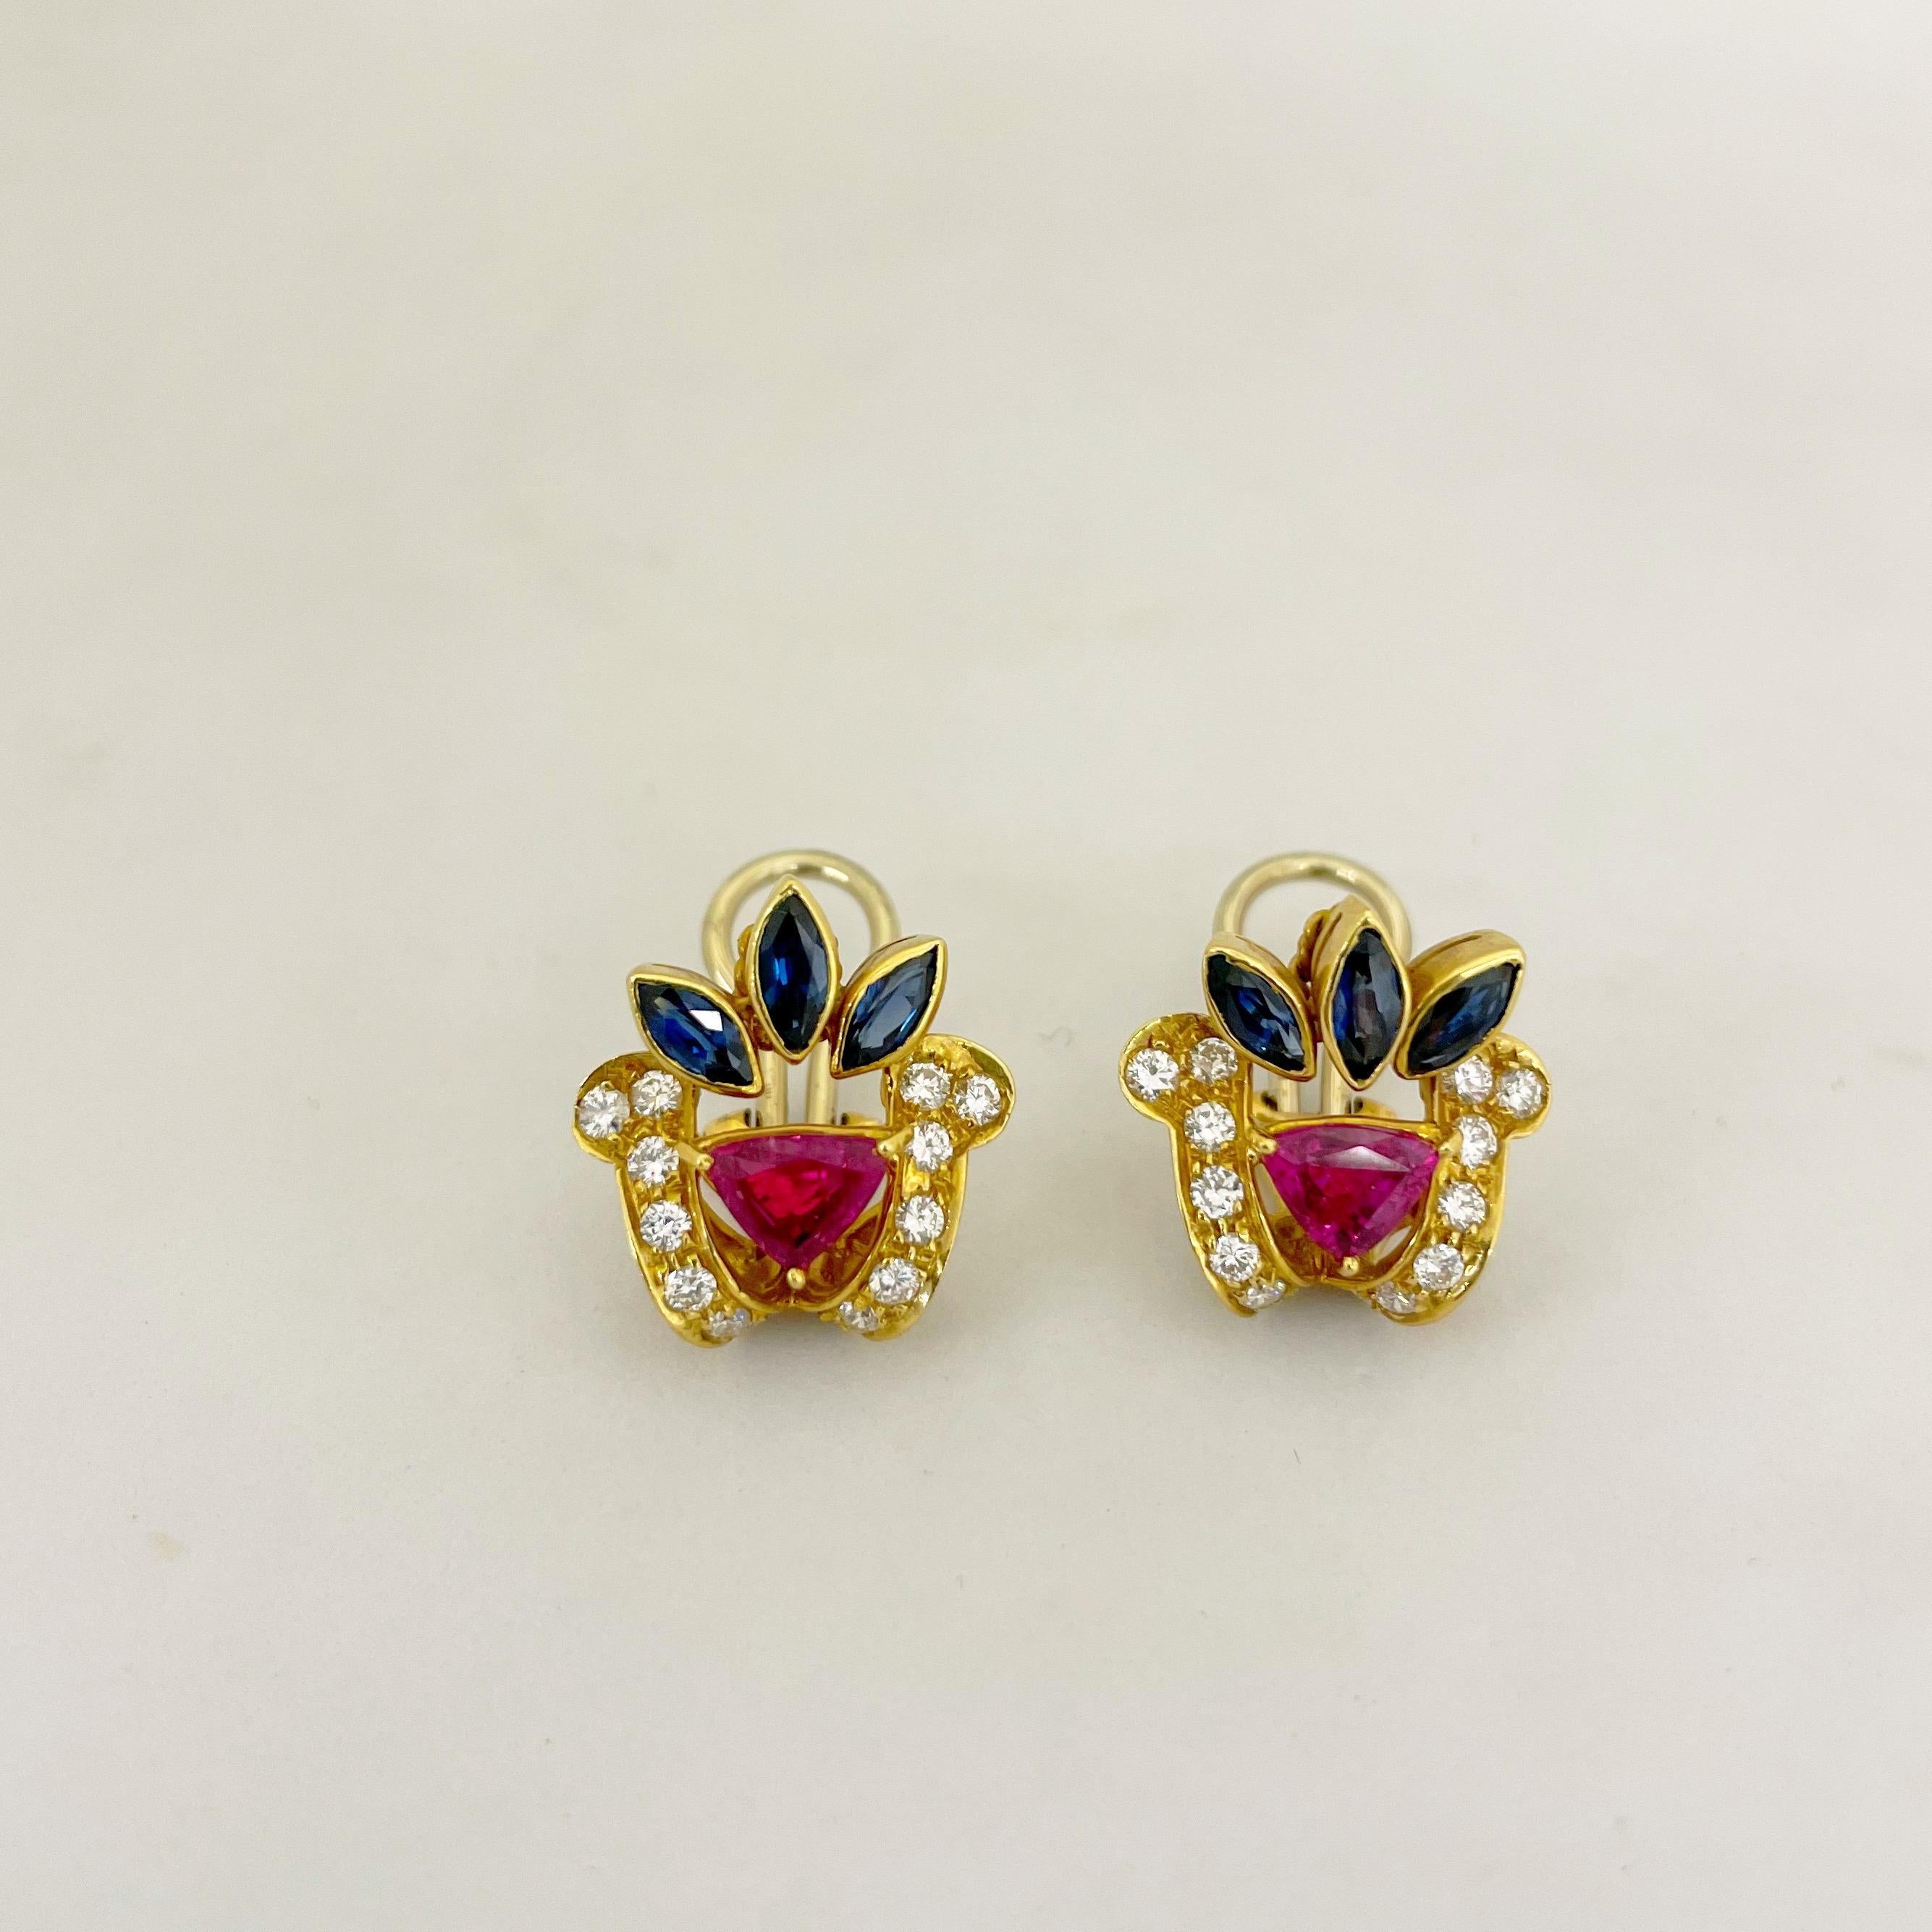 Contemporary 18KT Gold, 1.78 Carat Ruby, 1.59 Carat Sapphire, and .81 Carat Diamond Earrings For Sale